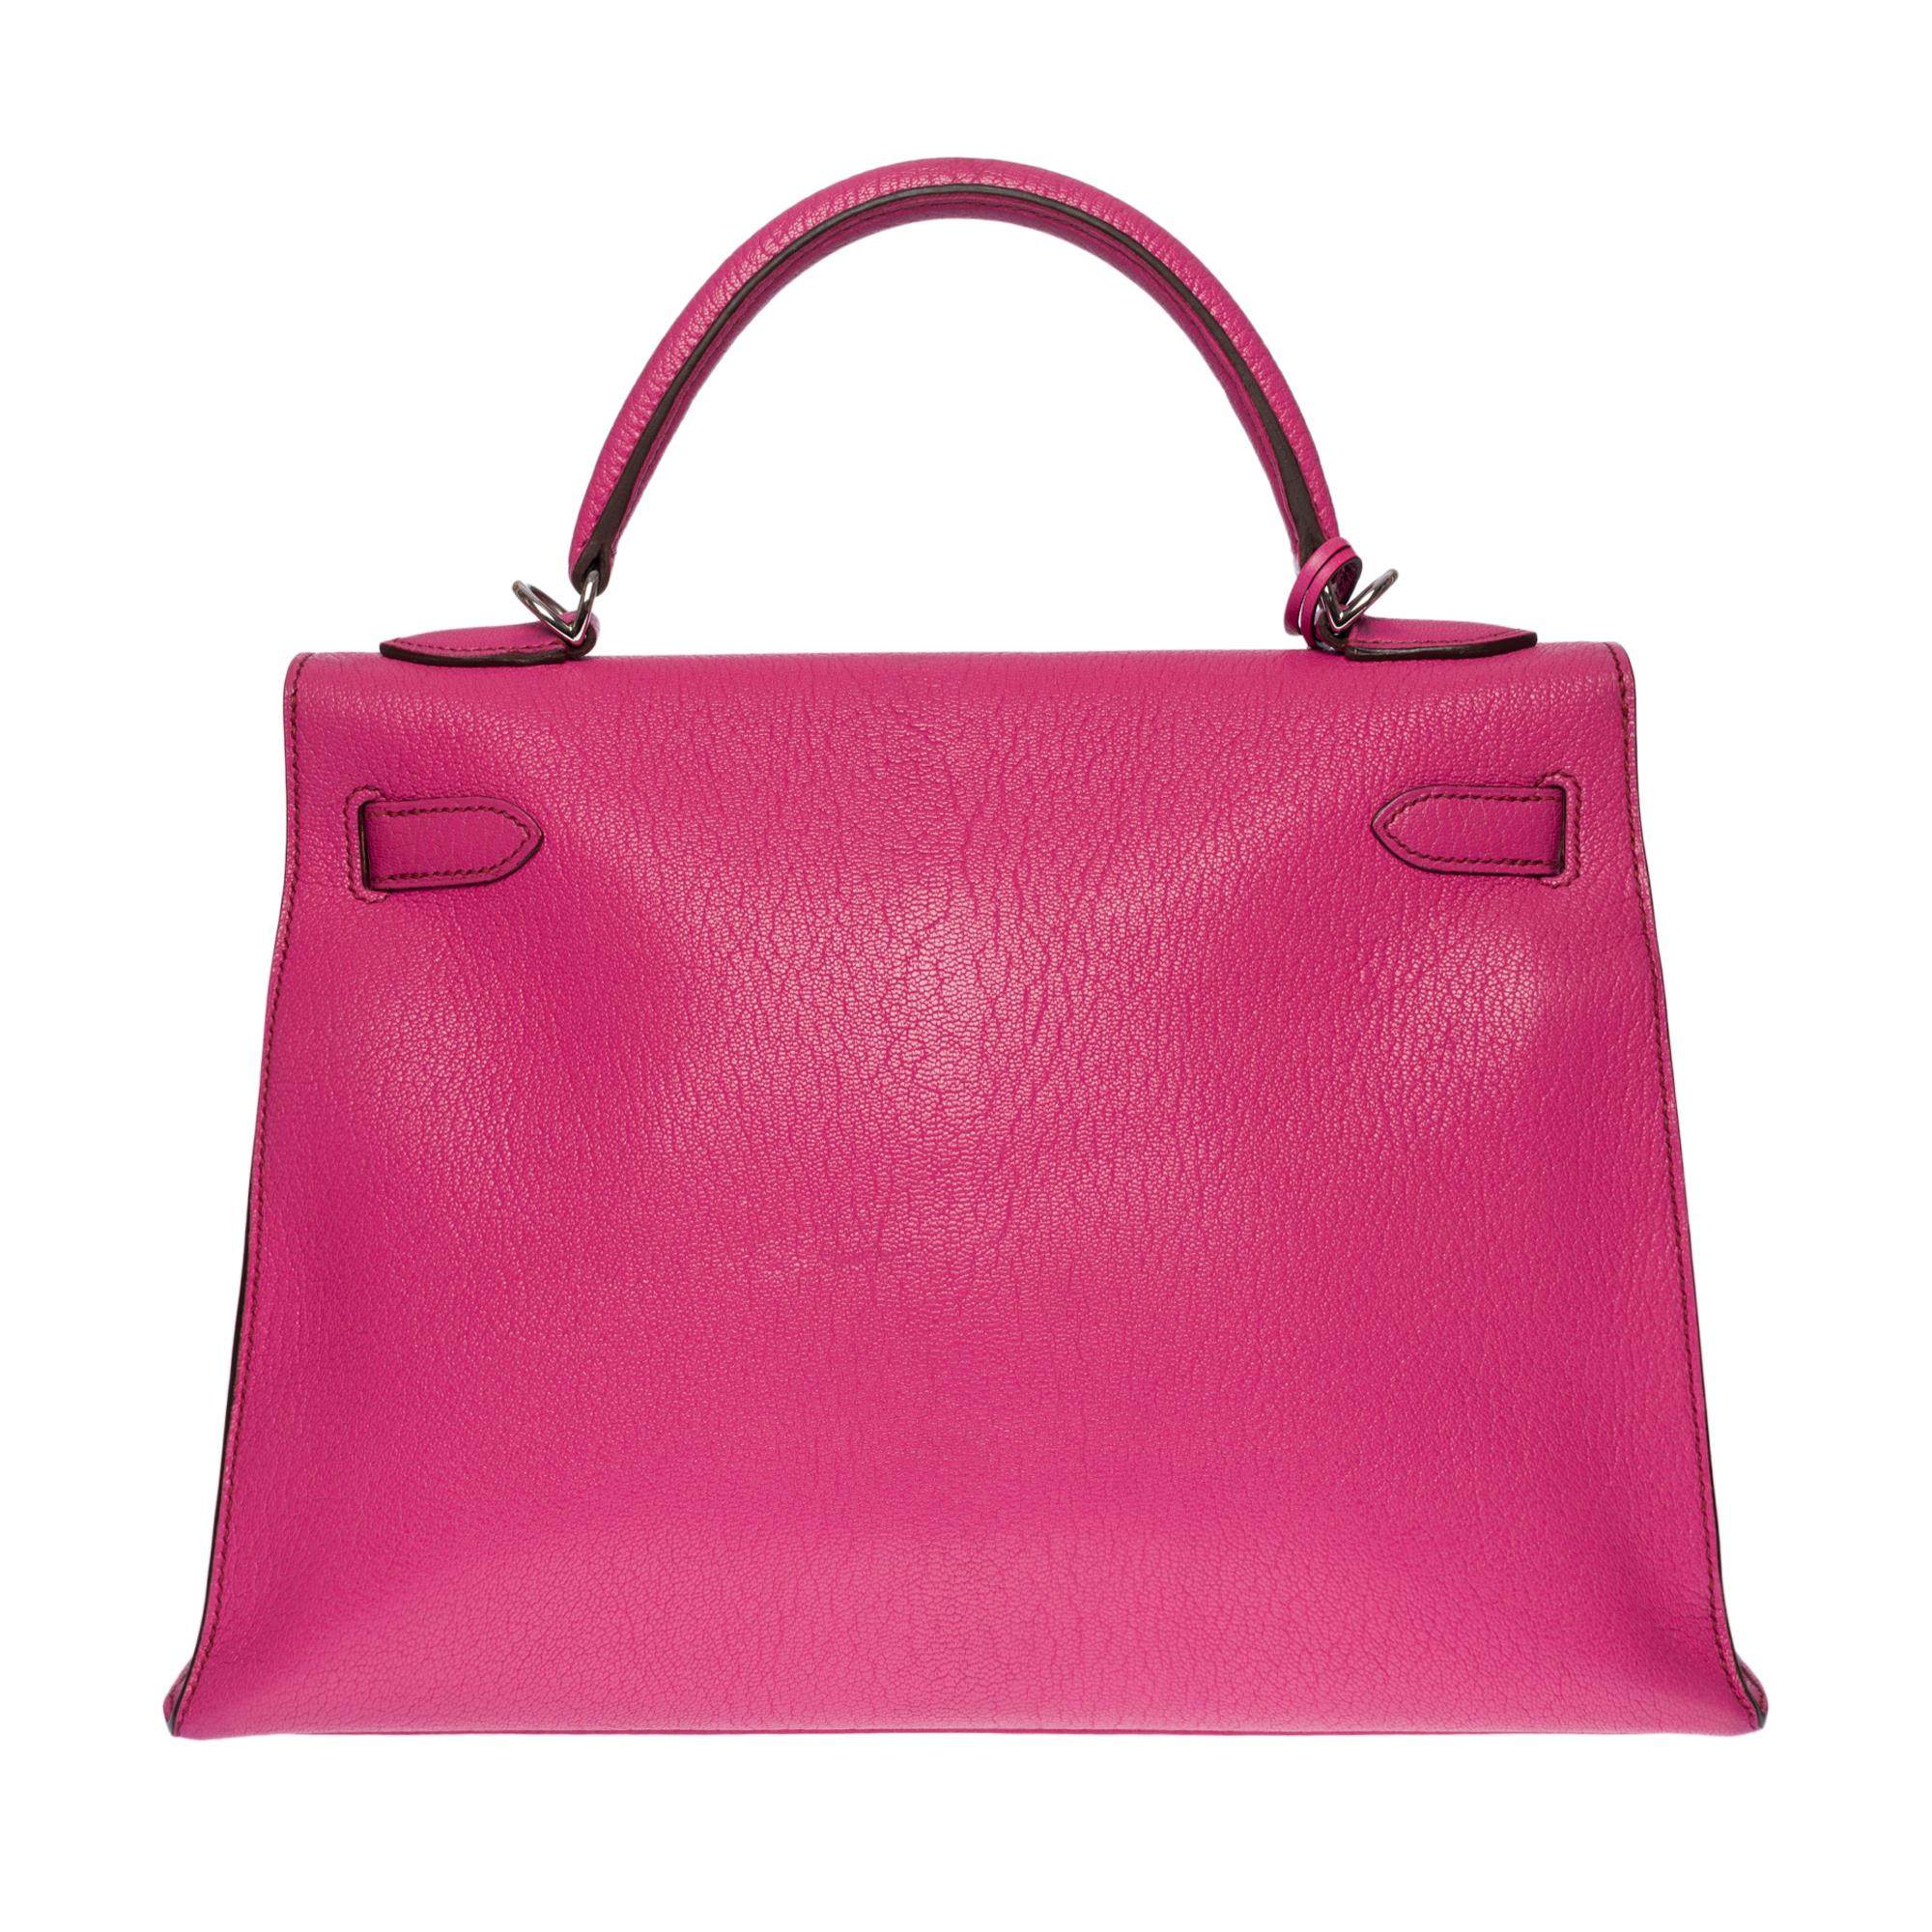 Splendid & Rare Hermes Kelly 32 sellier handbag 32 strap in Fuchsia Mysore chèvre leather, palladium silver plated hardware, single pink leather handle, removable shoulder strap in pink leather for a hand or shoulder support

Flap closure
Pink